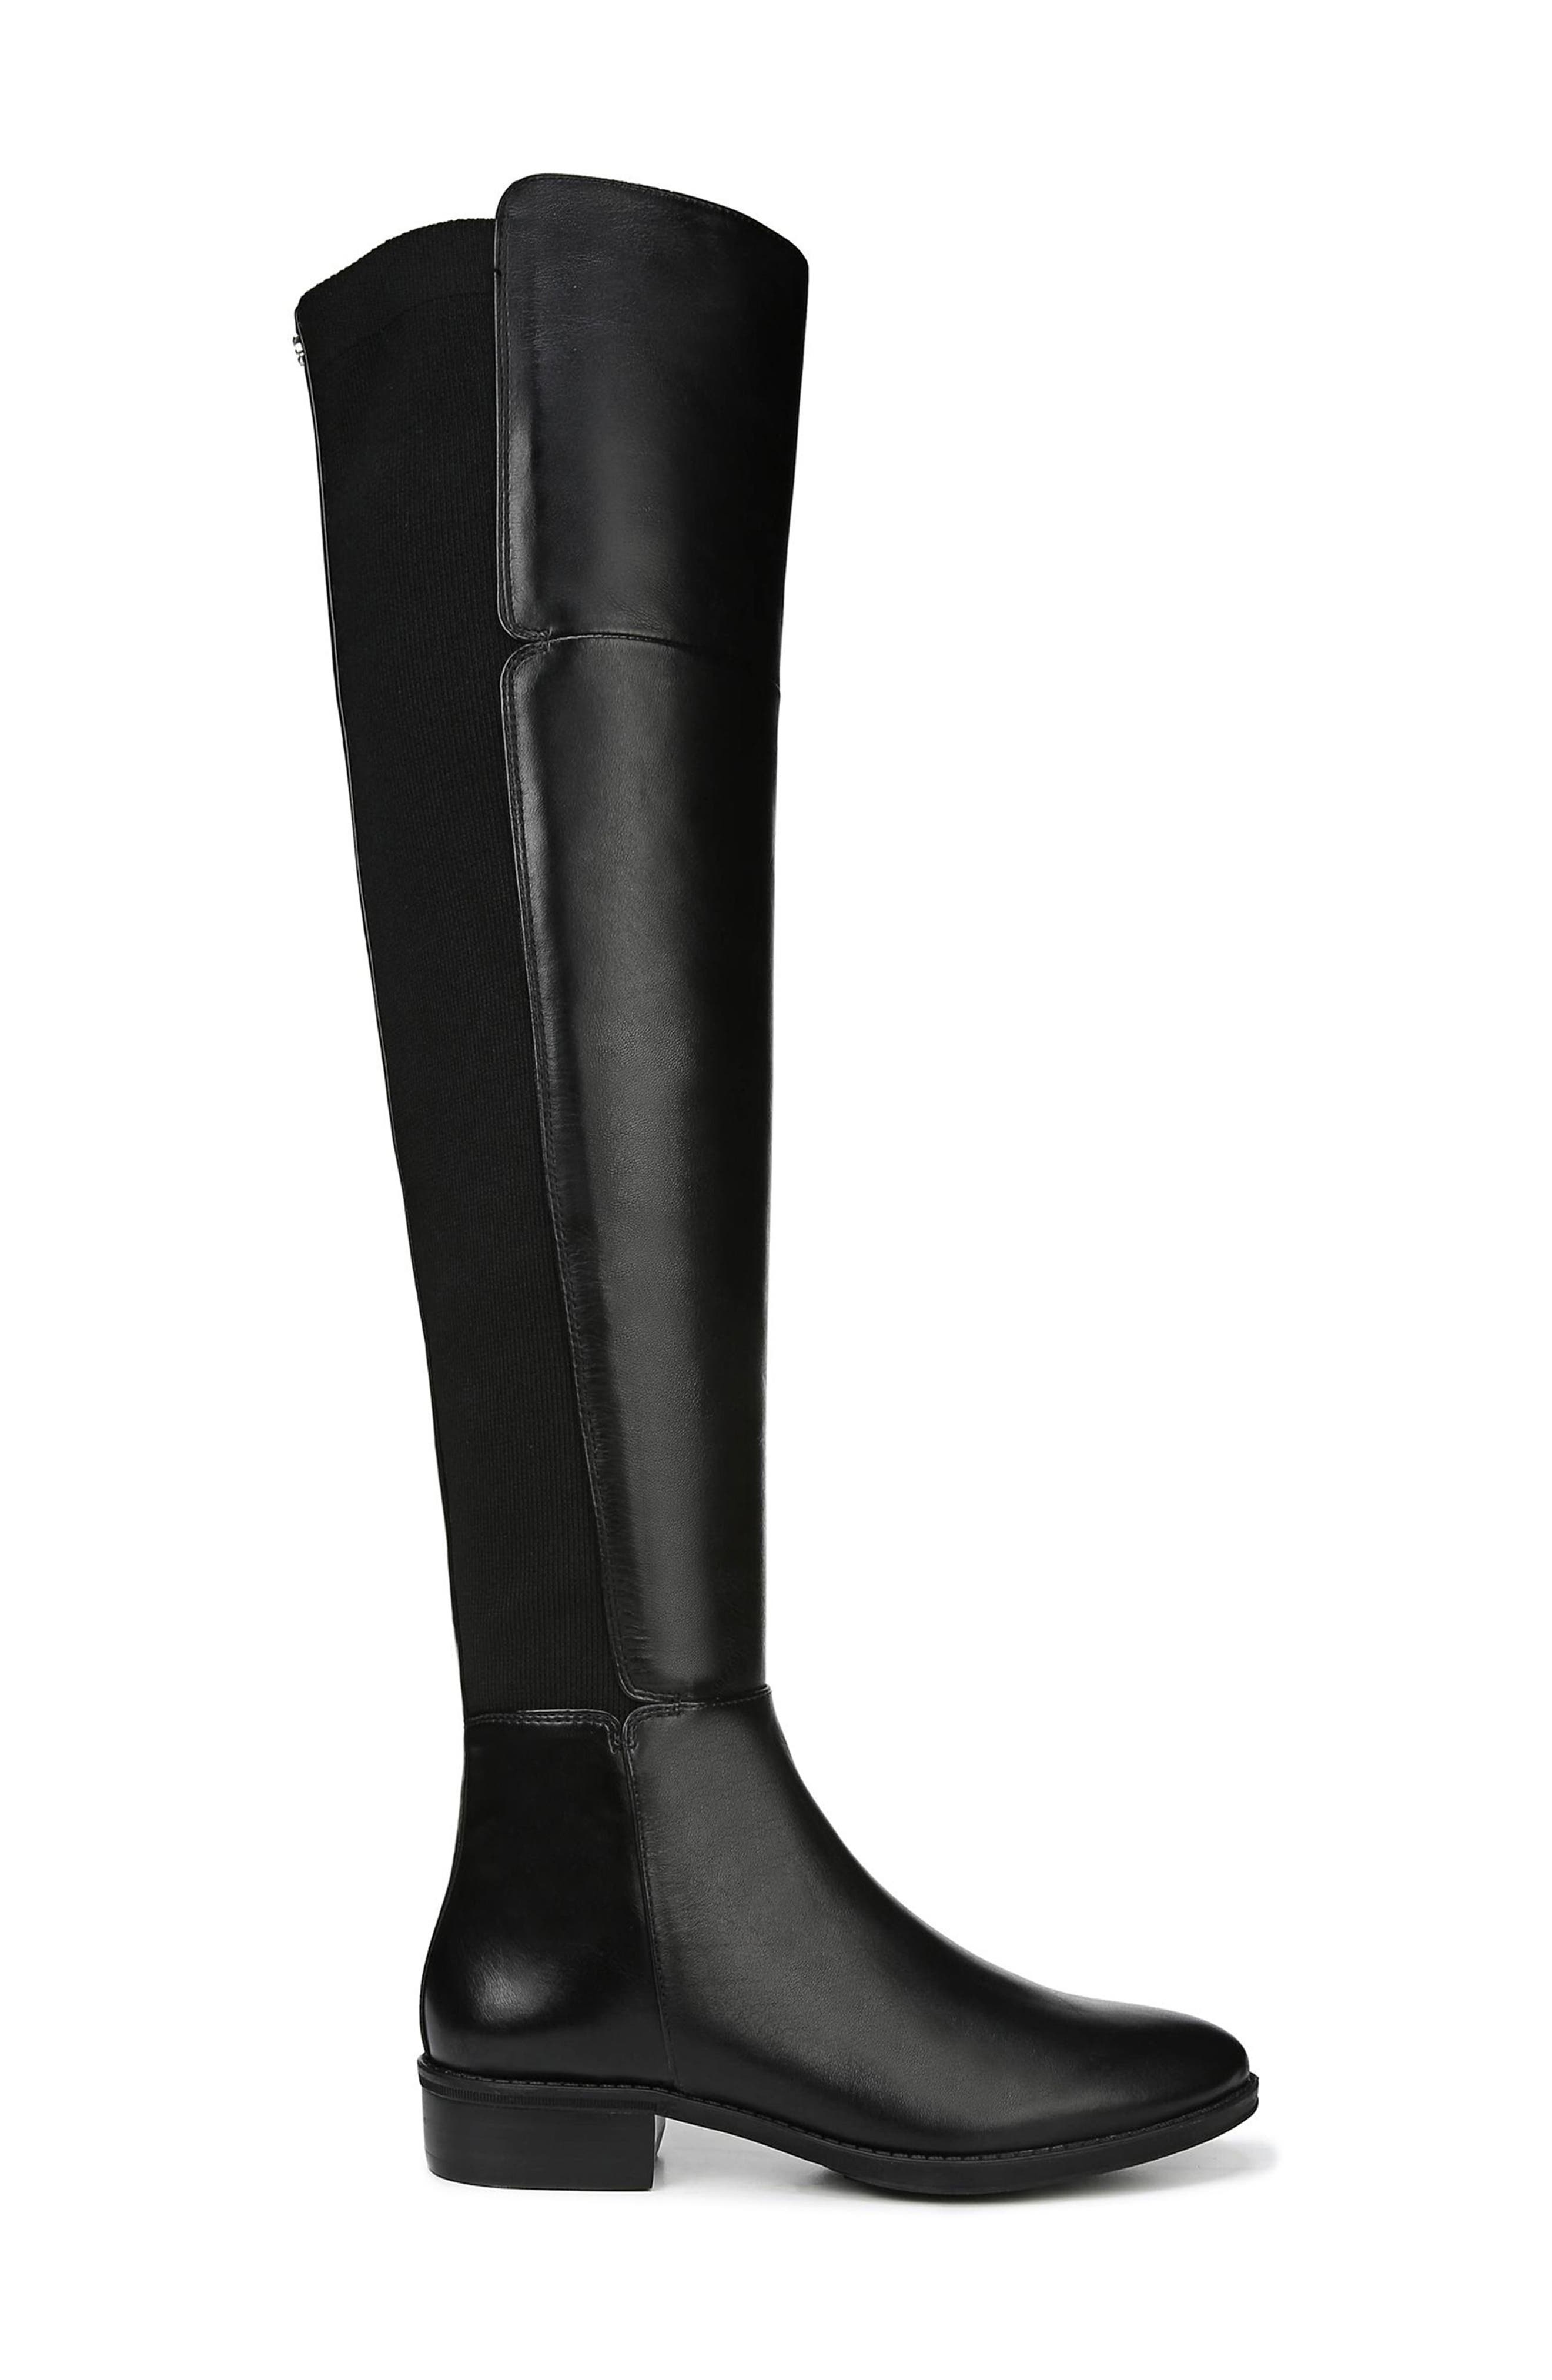 pam over the knee boot